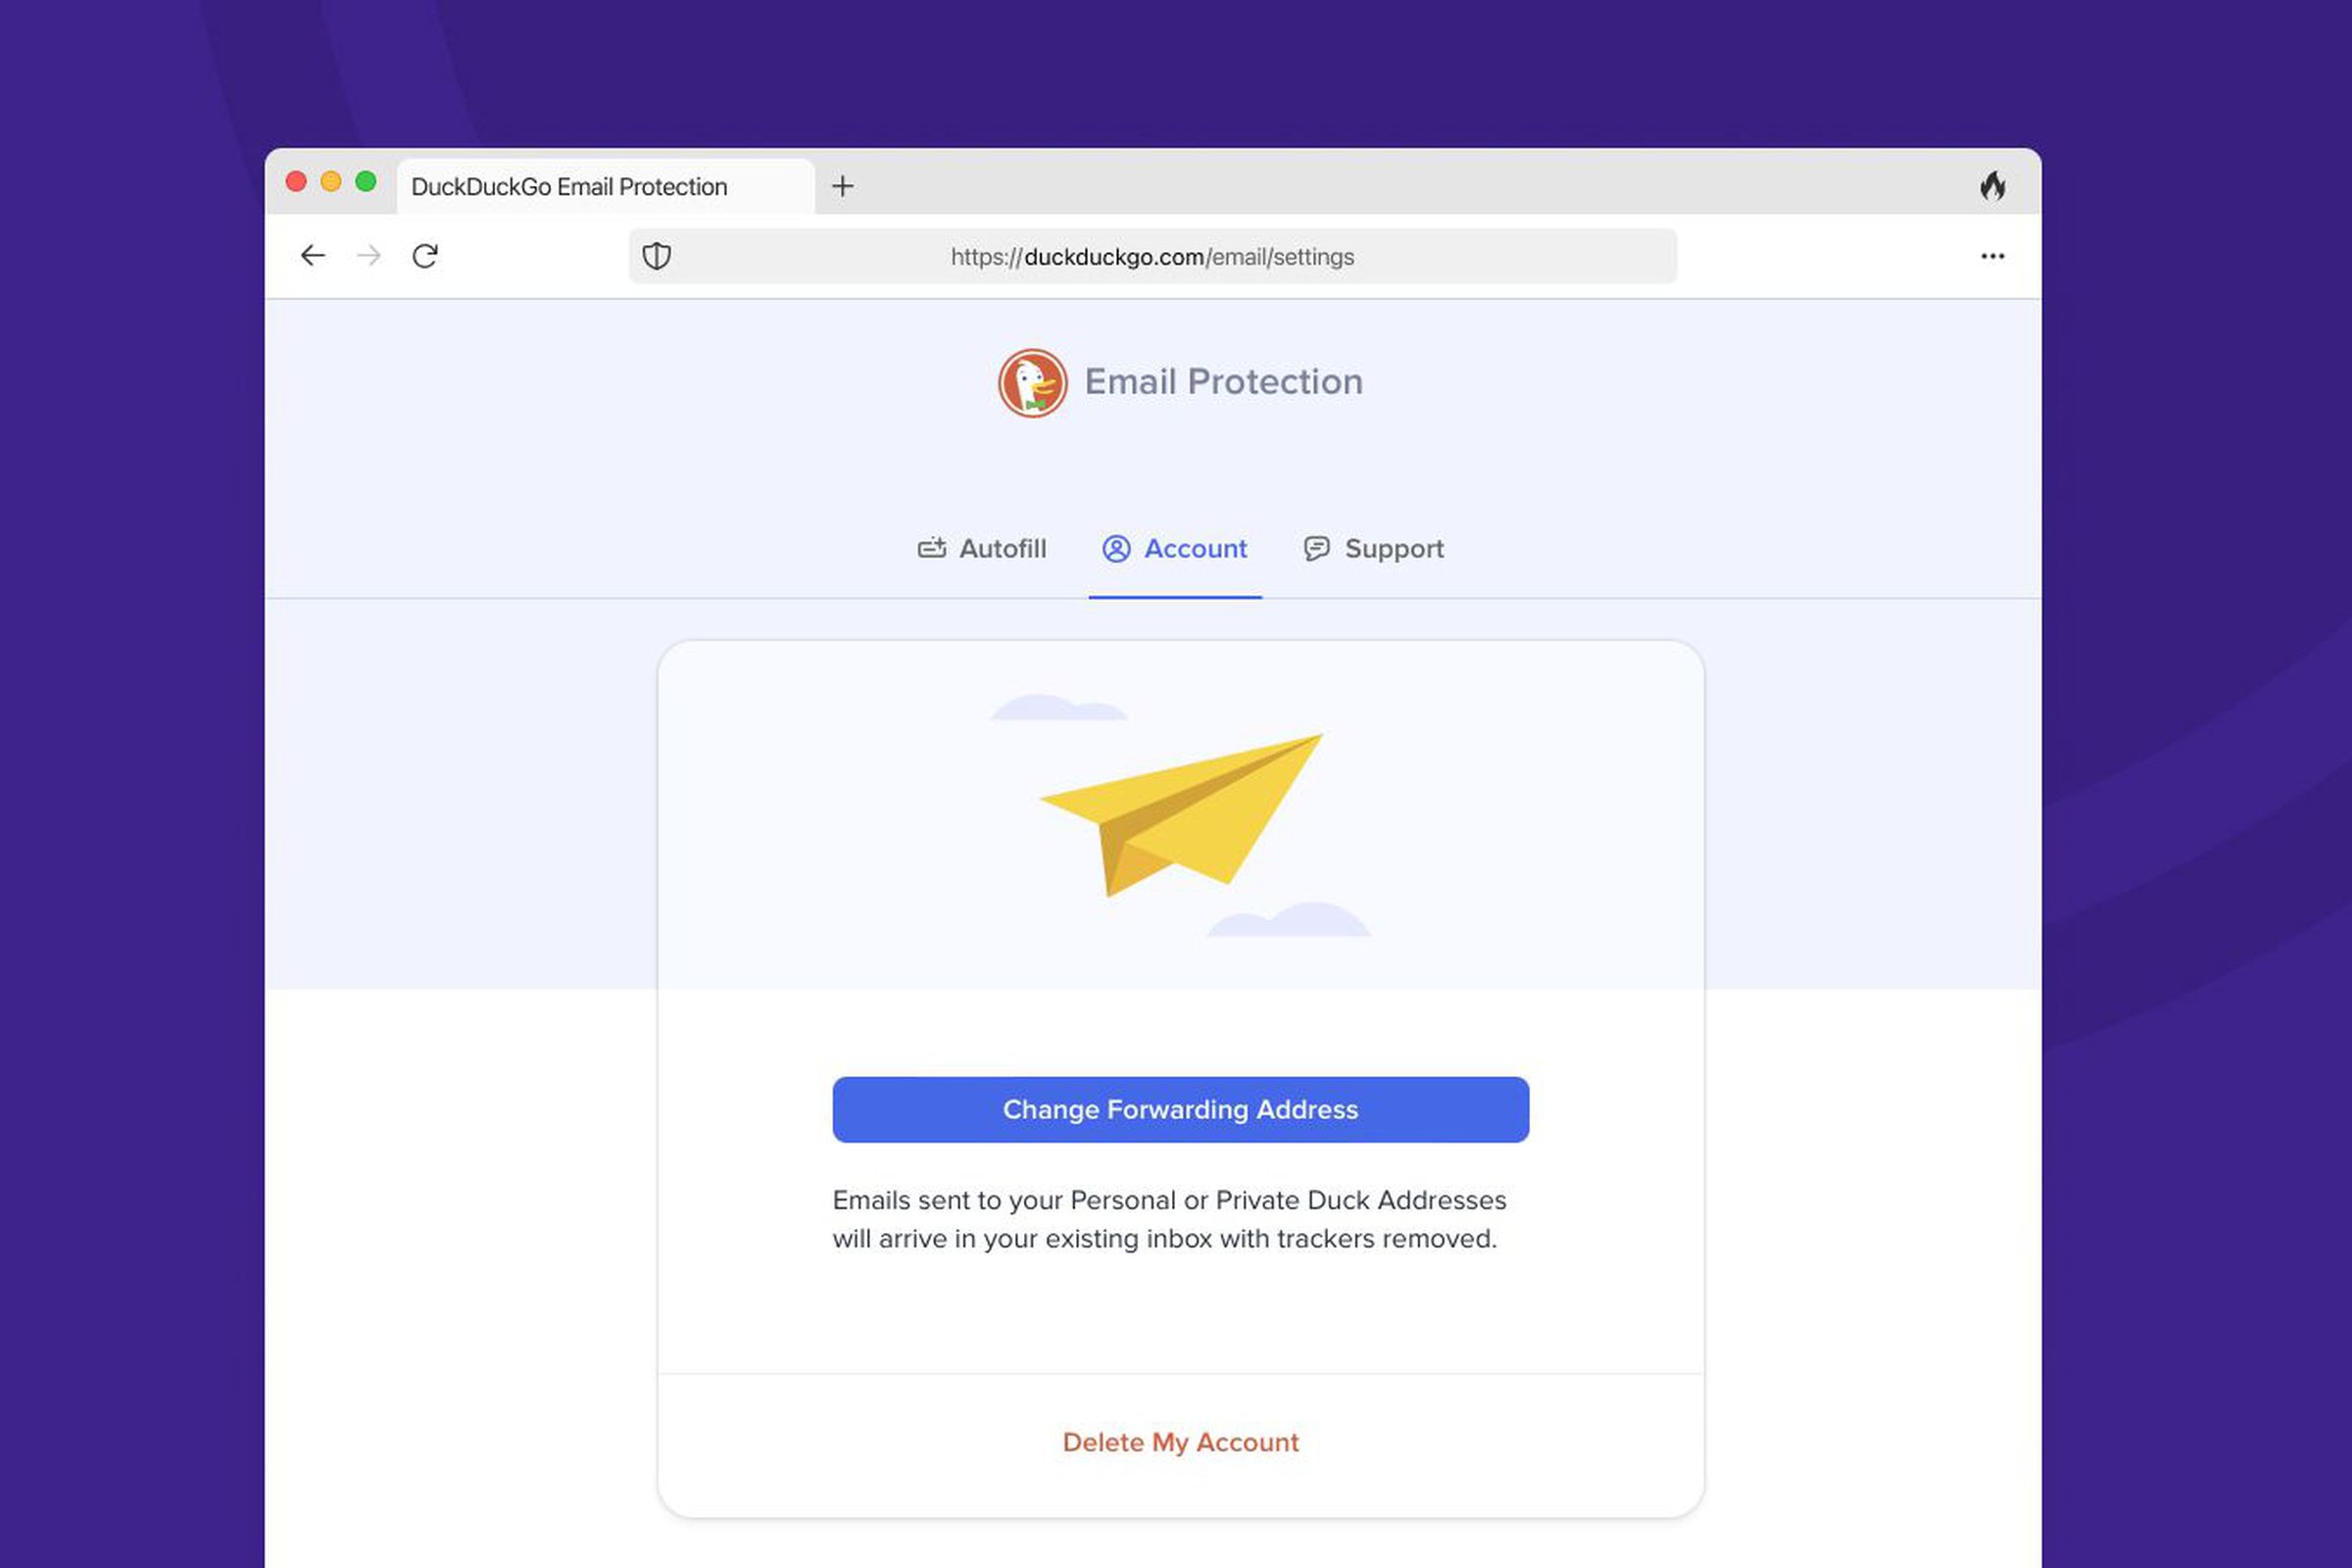 DuckDuckGo’s Email Protection dashboard.